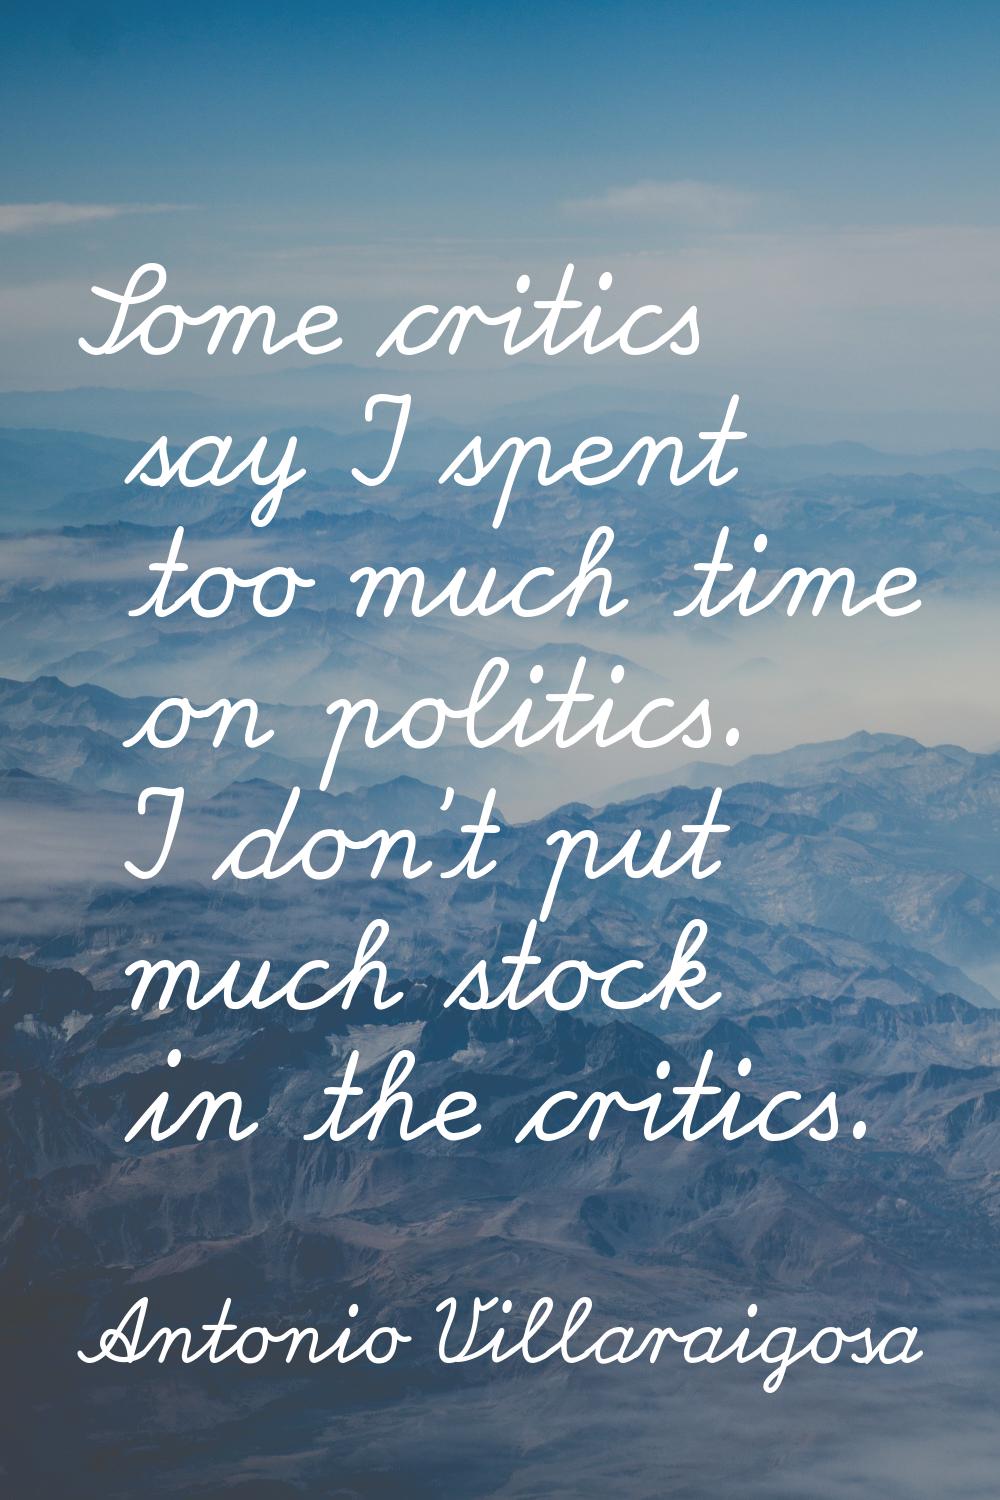 Some critics say I spent too much time on politics. I don't put much stock in the critics.